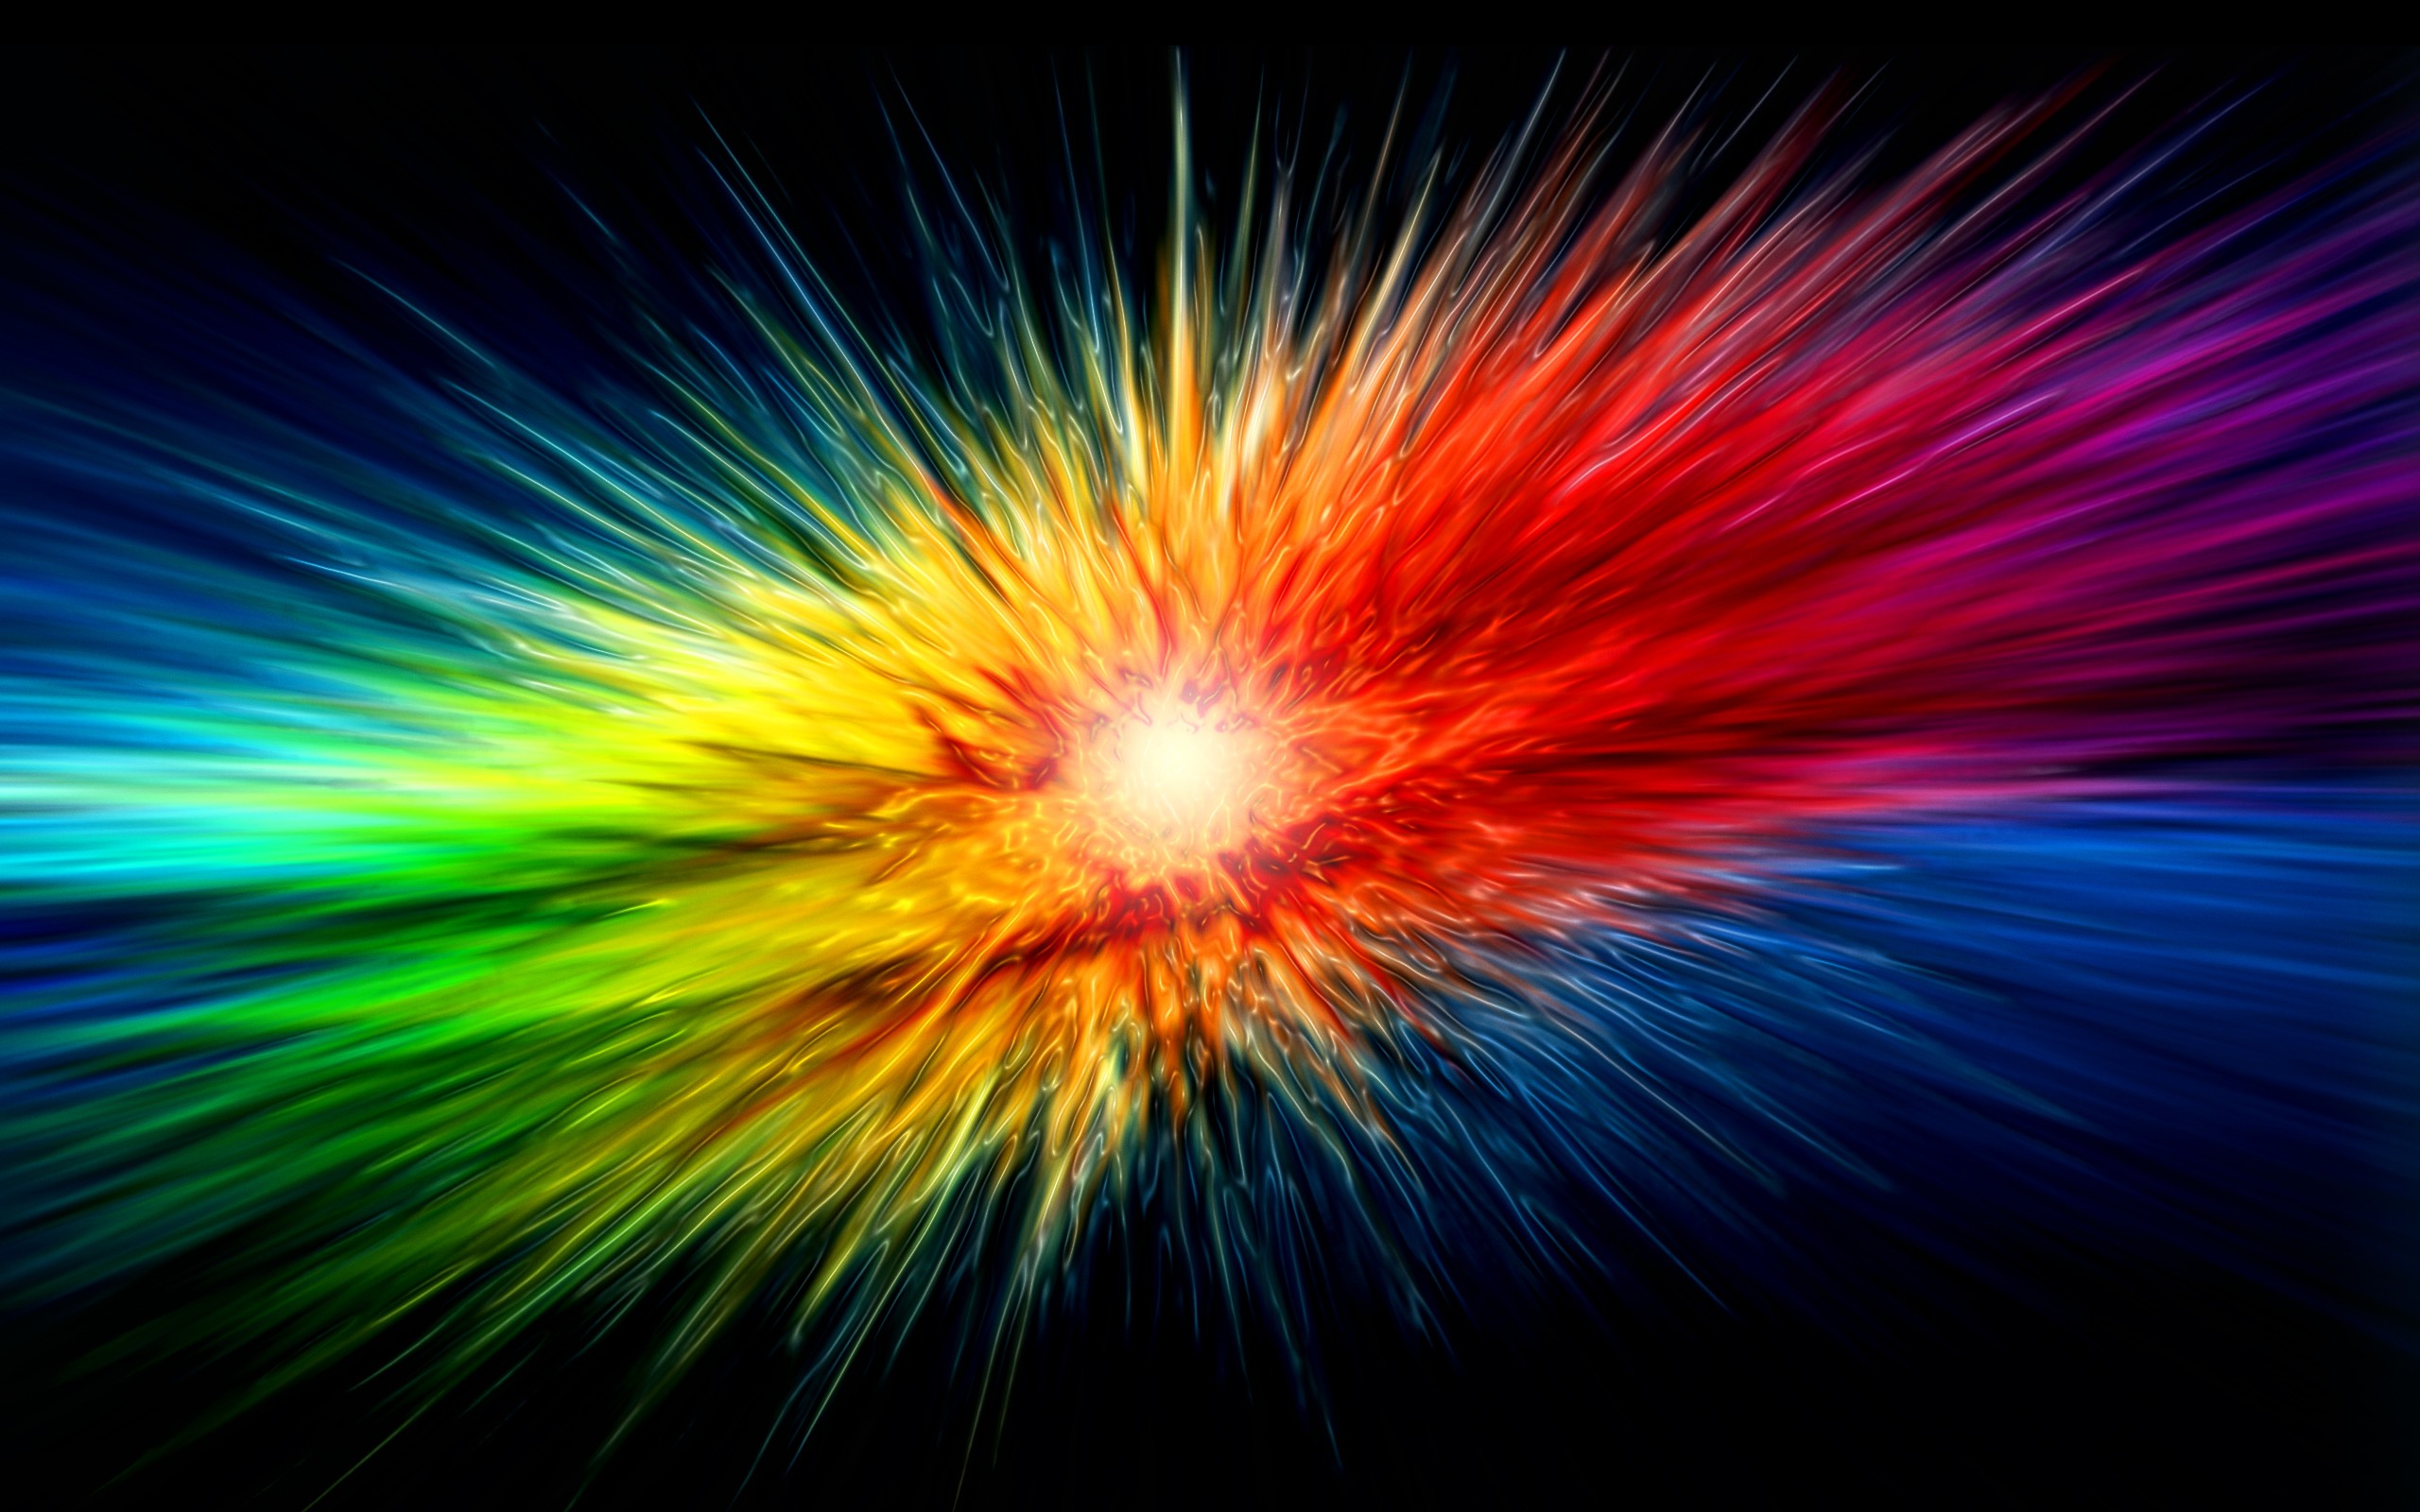 Colorful Abstract Splash Wallpaper 7937